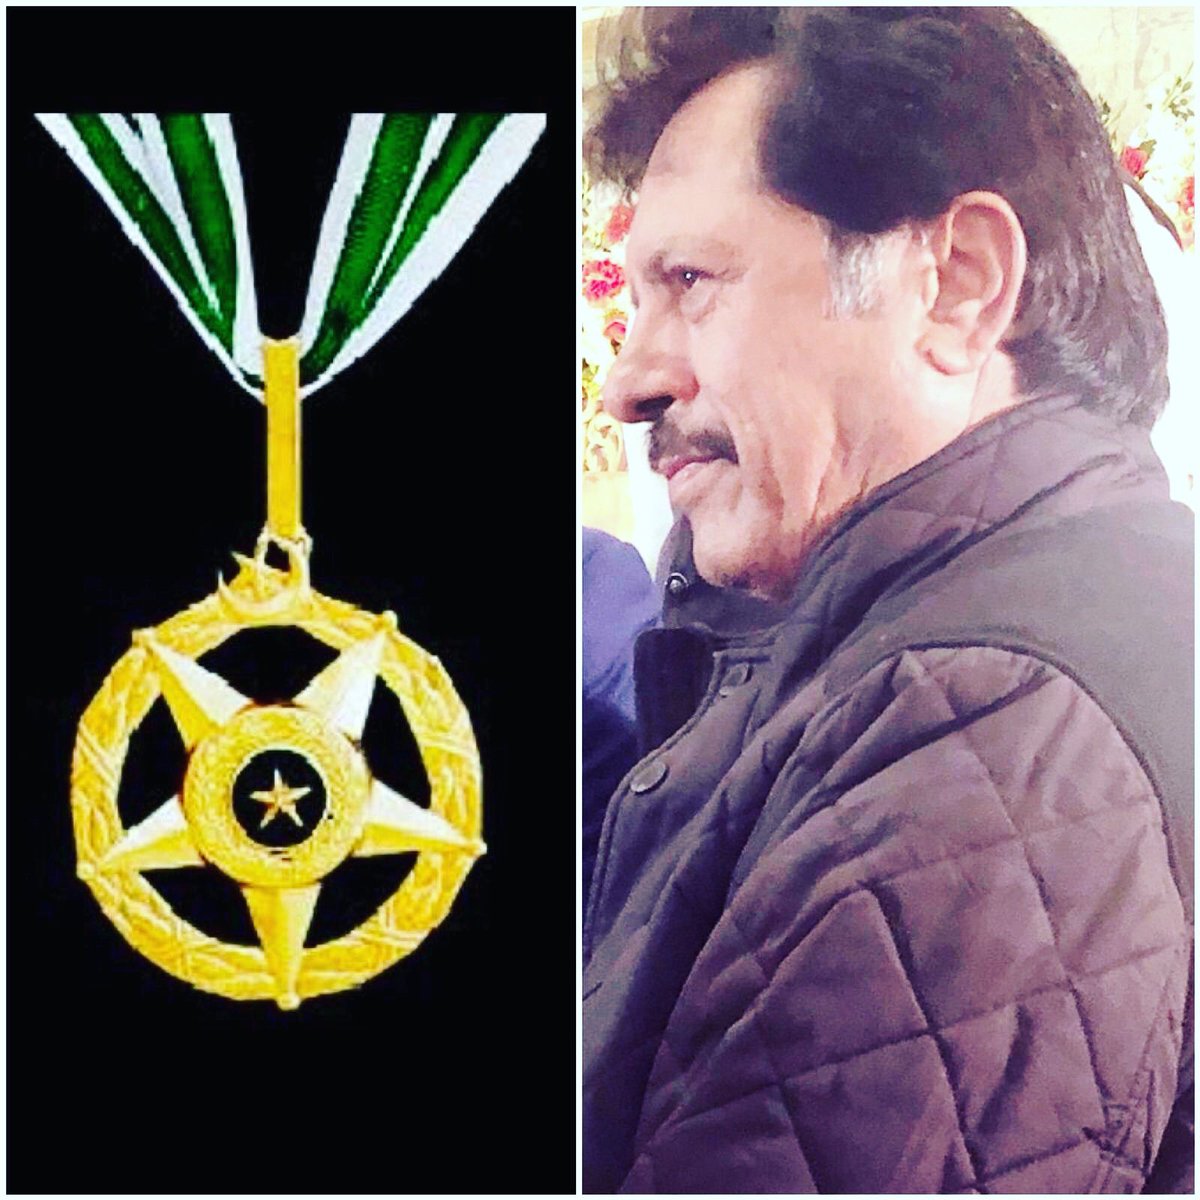 It gives me immense pride to announce that my father is now being selected for Sitara-e-Imtiaz - a highest prestigious medal & award given for achievements and efforts in bringing a positive name for Pakistan. #PrideofPakistan #Sitaraeimtiaz #Esakhelvi #AttaullahKhanEsakhelvi